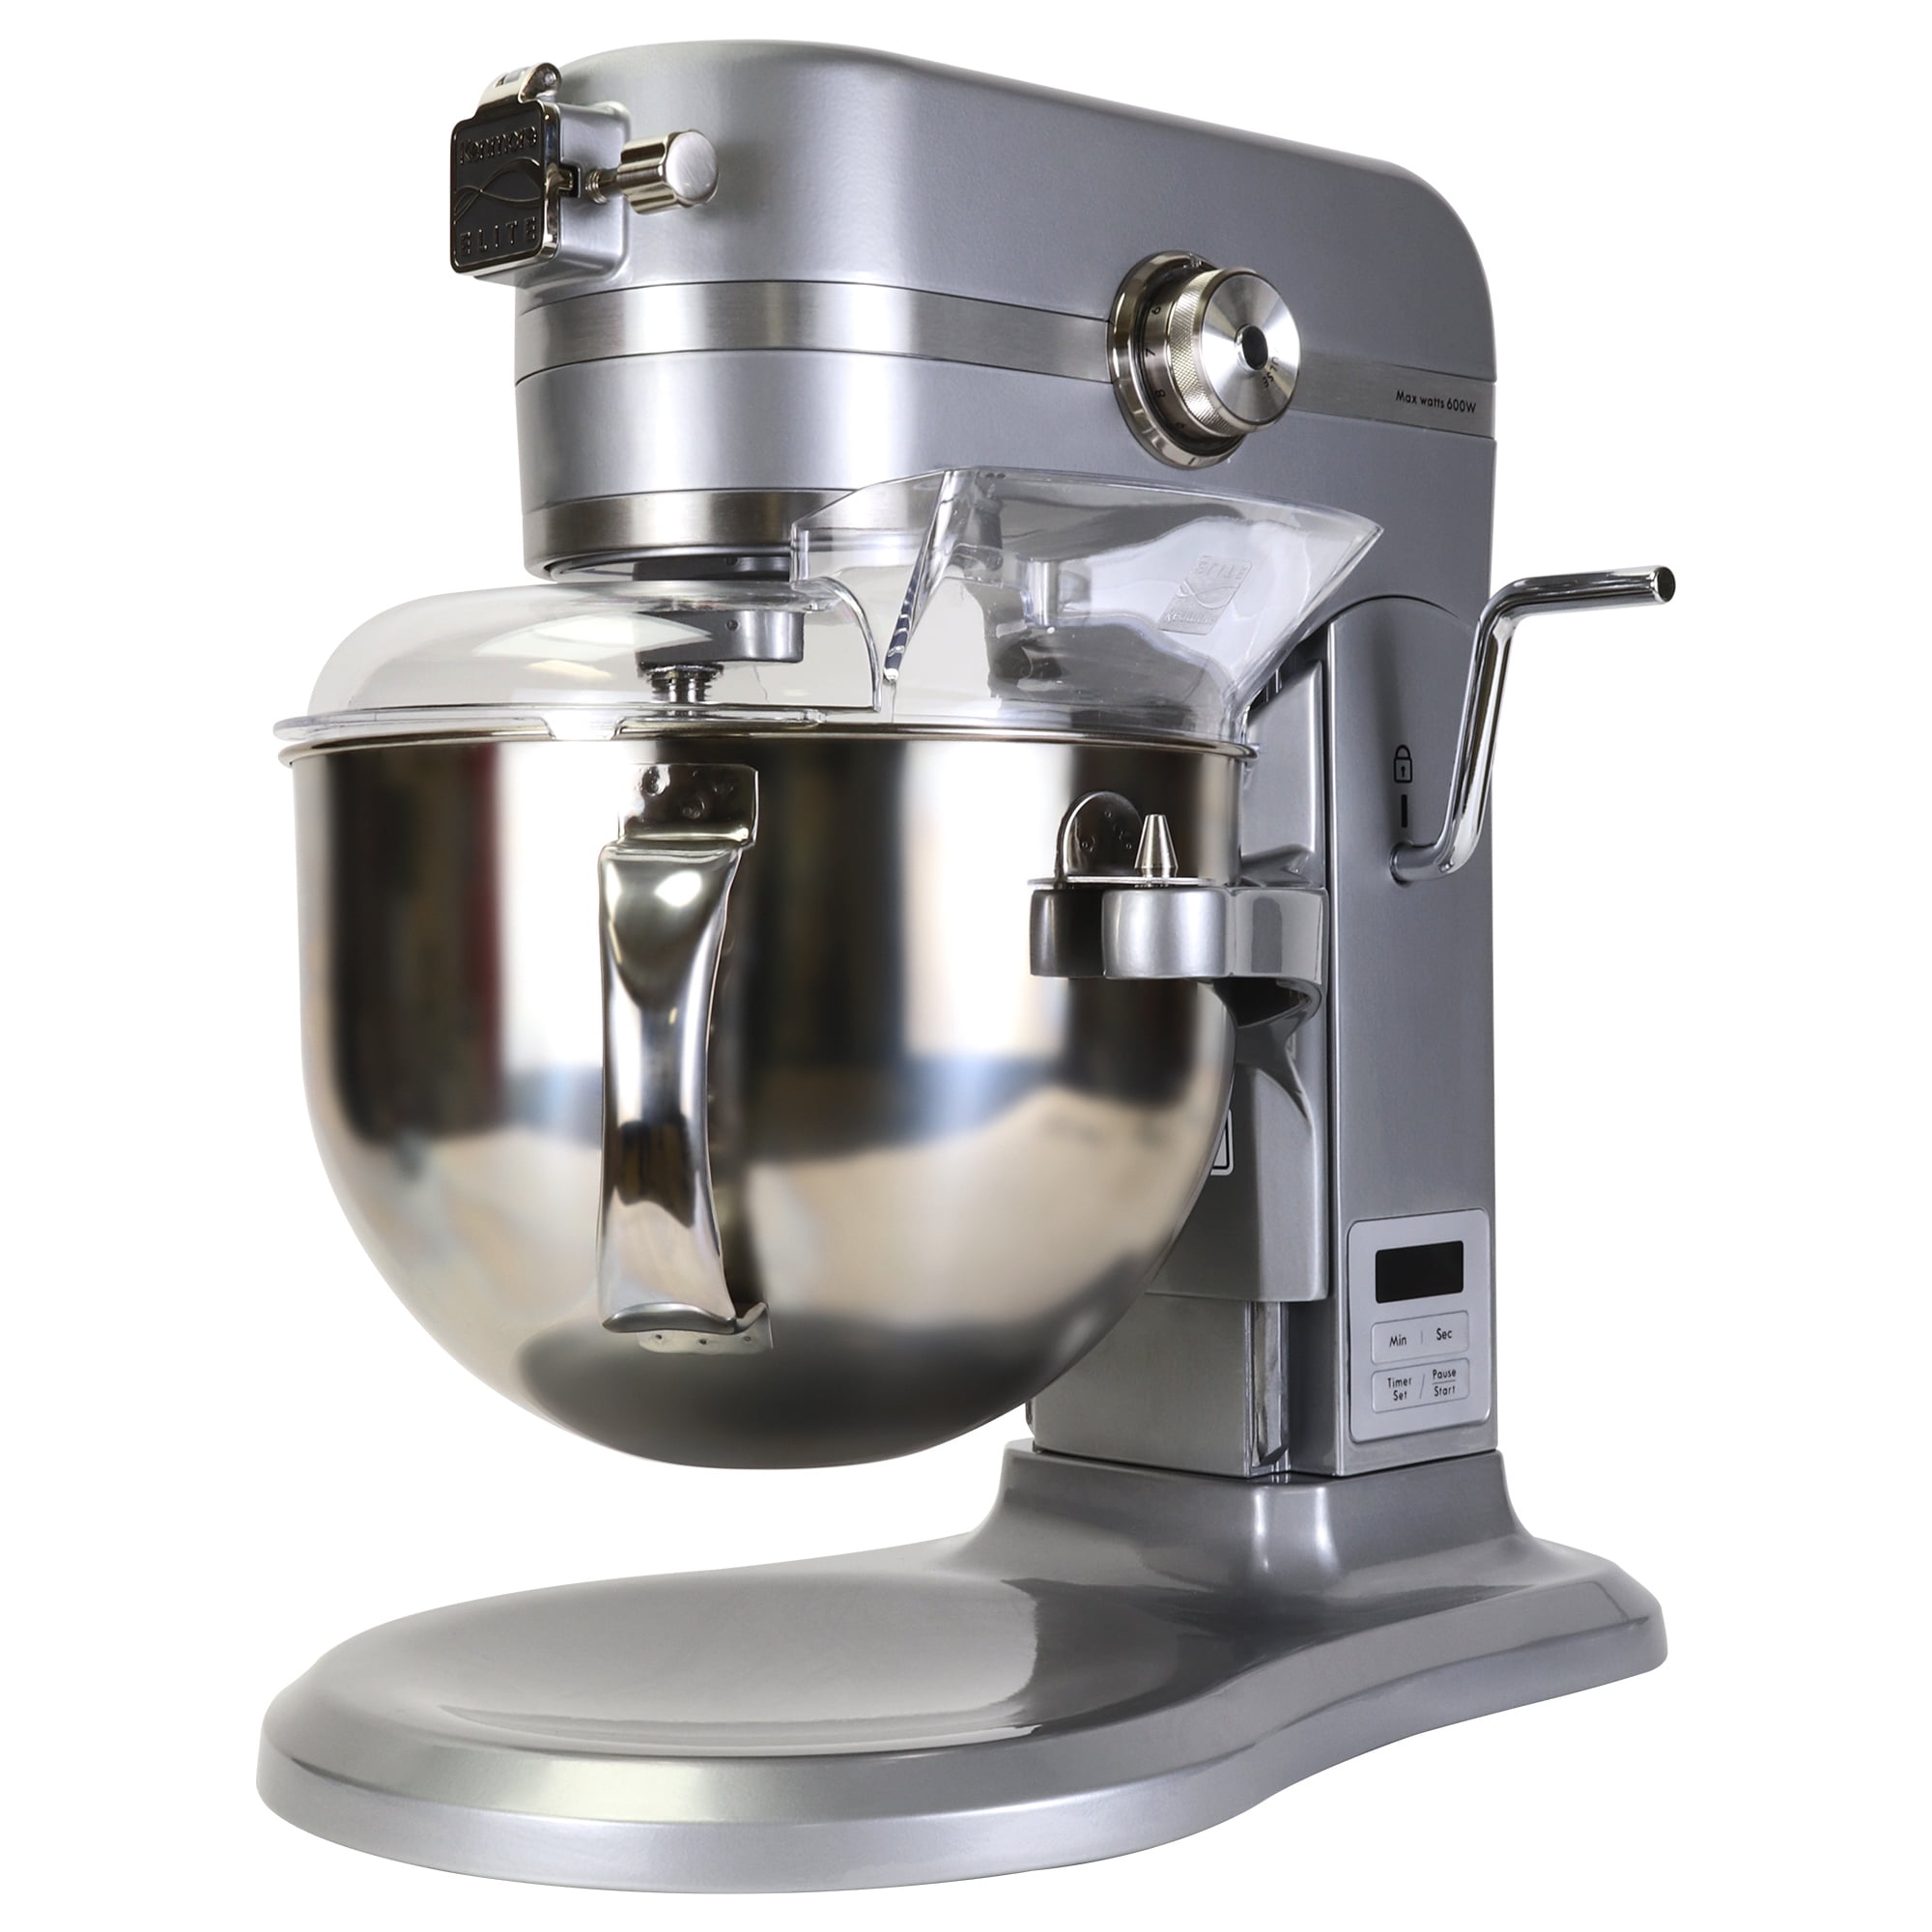 Picture of Kenmore 6037640 6 qt. Elite Silver 10 Speed Stand Mixer with Timer